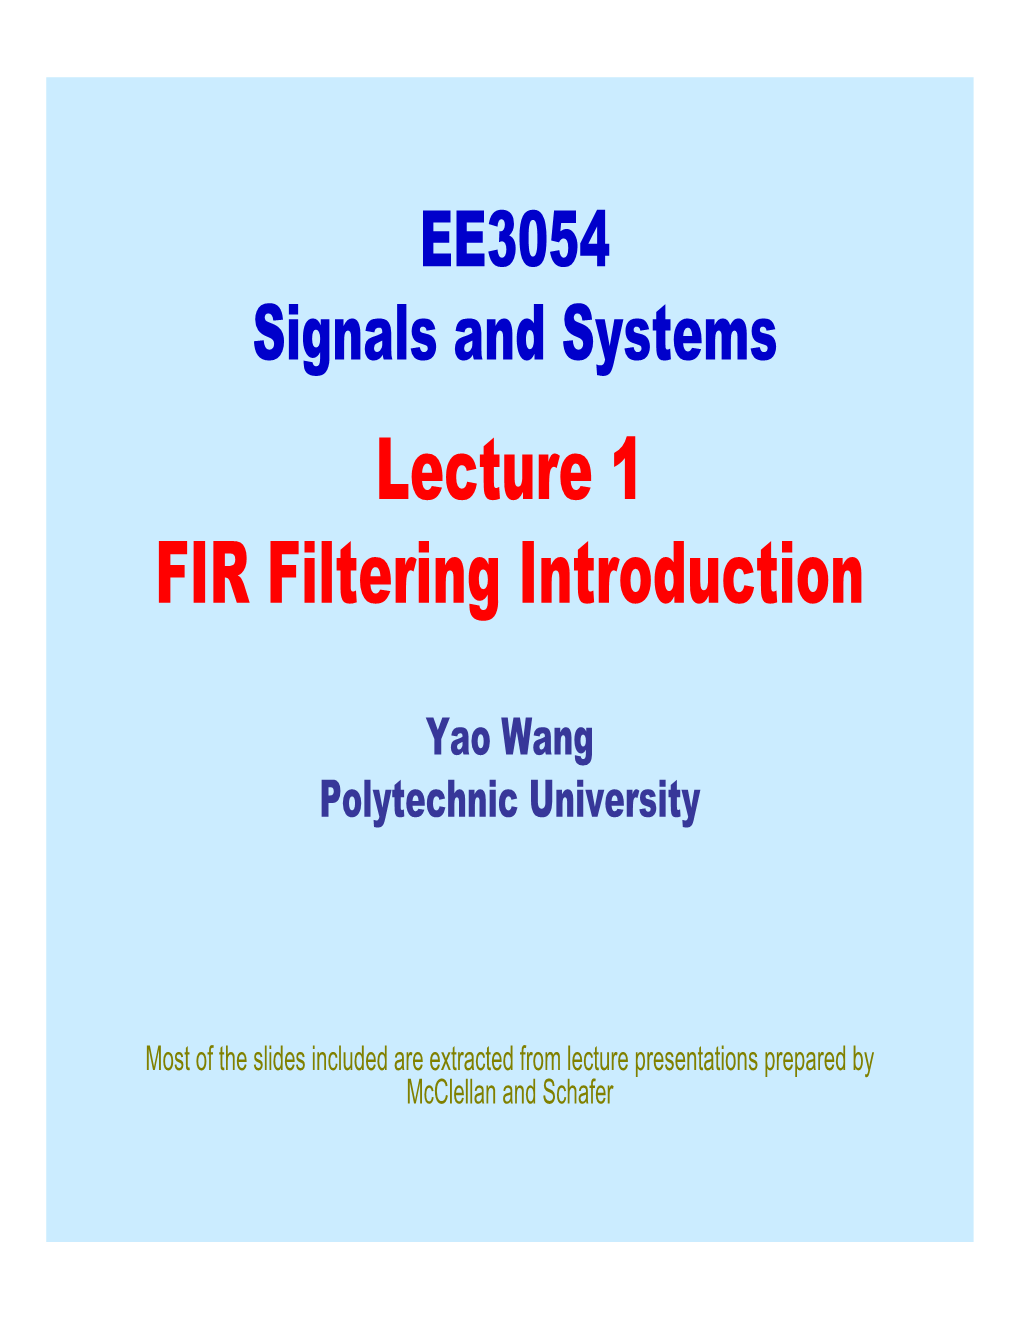 Lecture 1 FIR Filtering Introduction